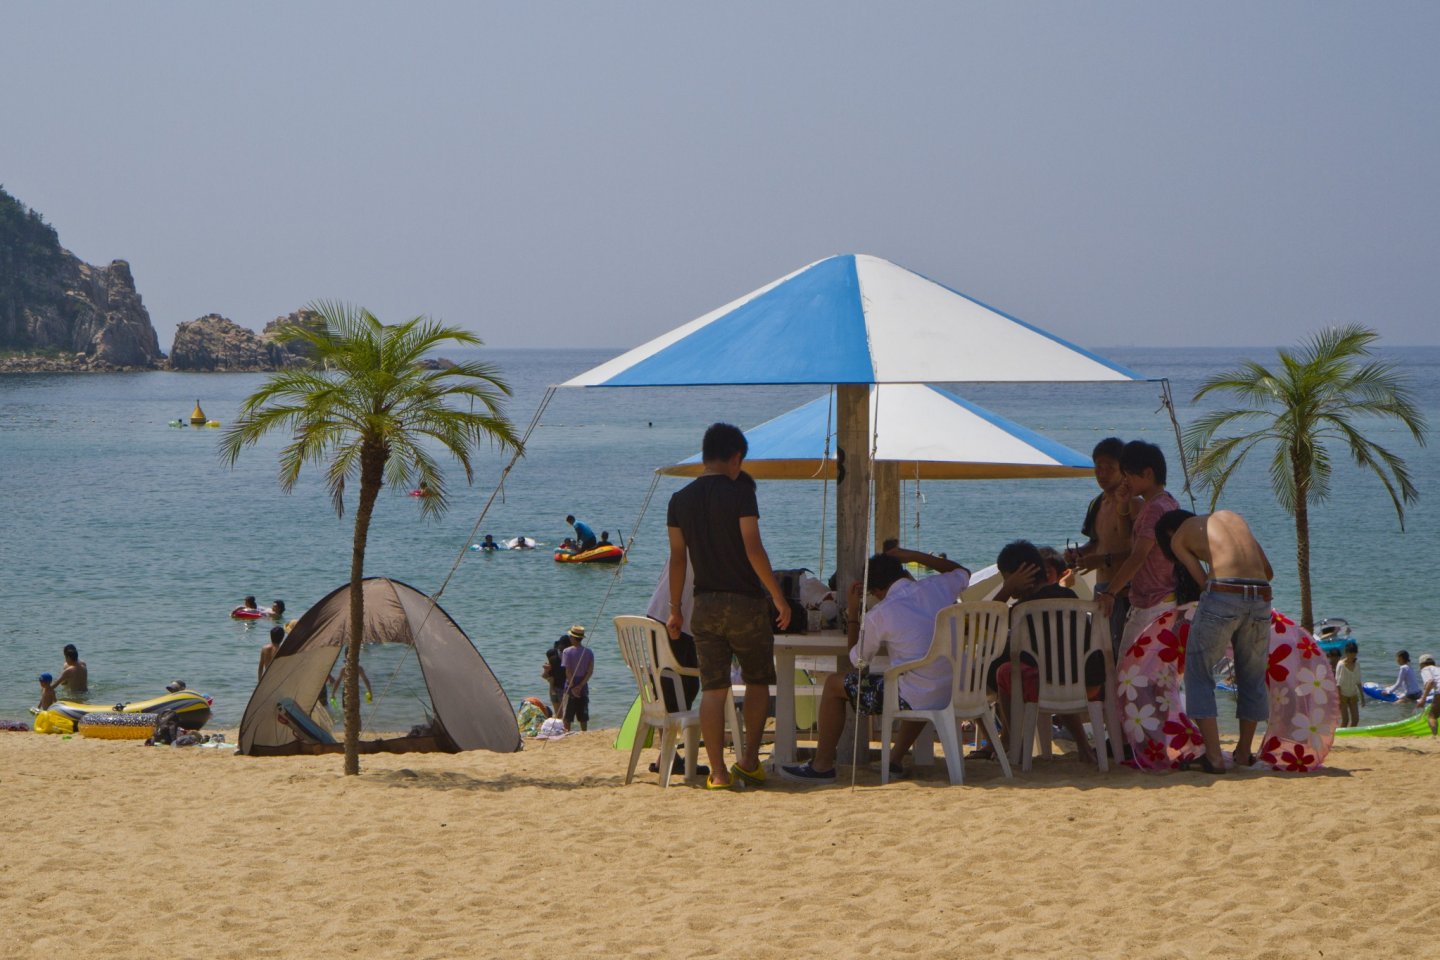 The beach houses provide large parasols and seating on the beach